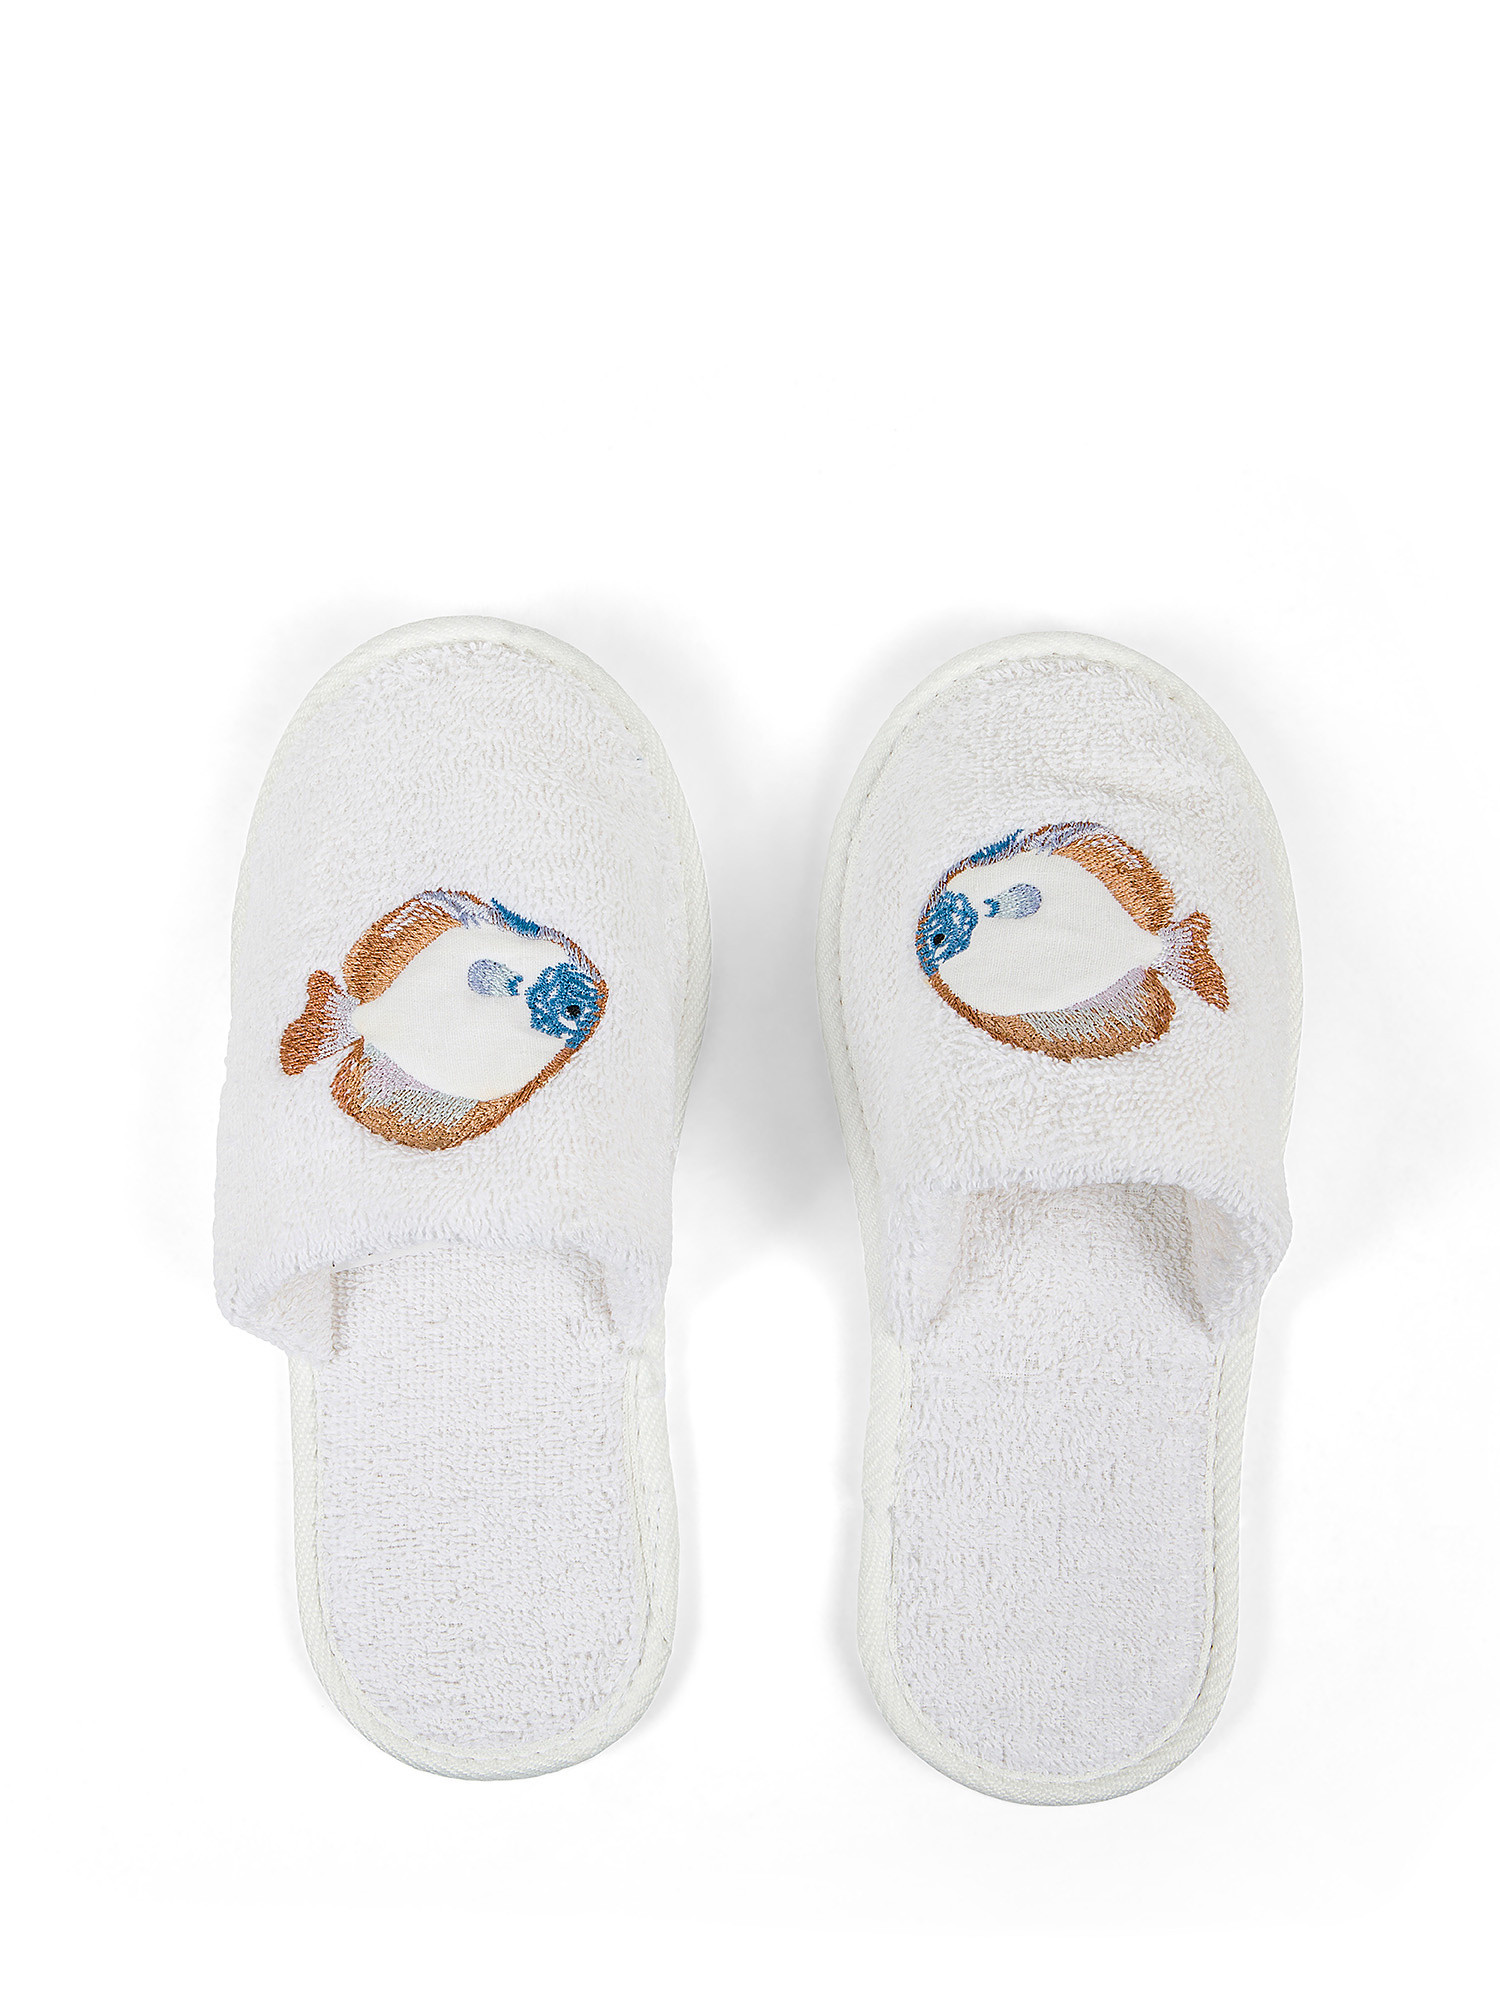 Terry slippers with embroidery, White, large image number 0